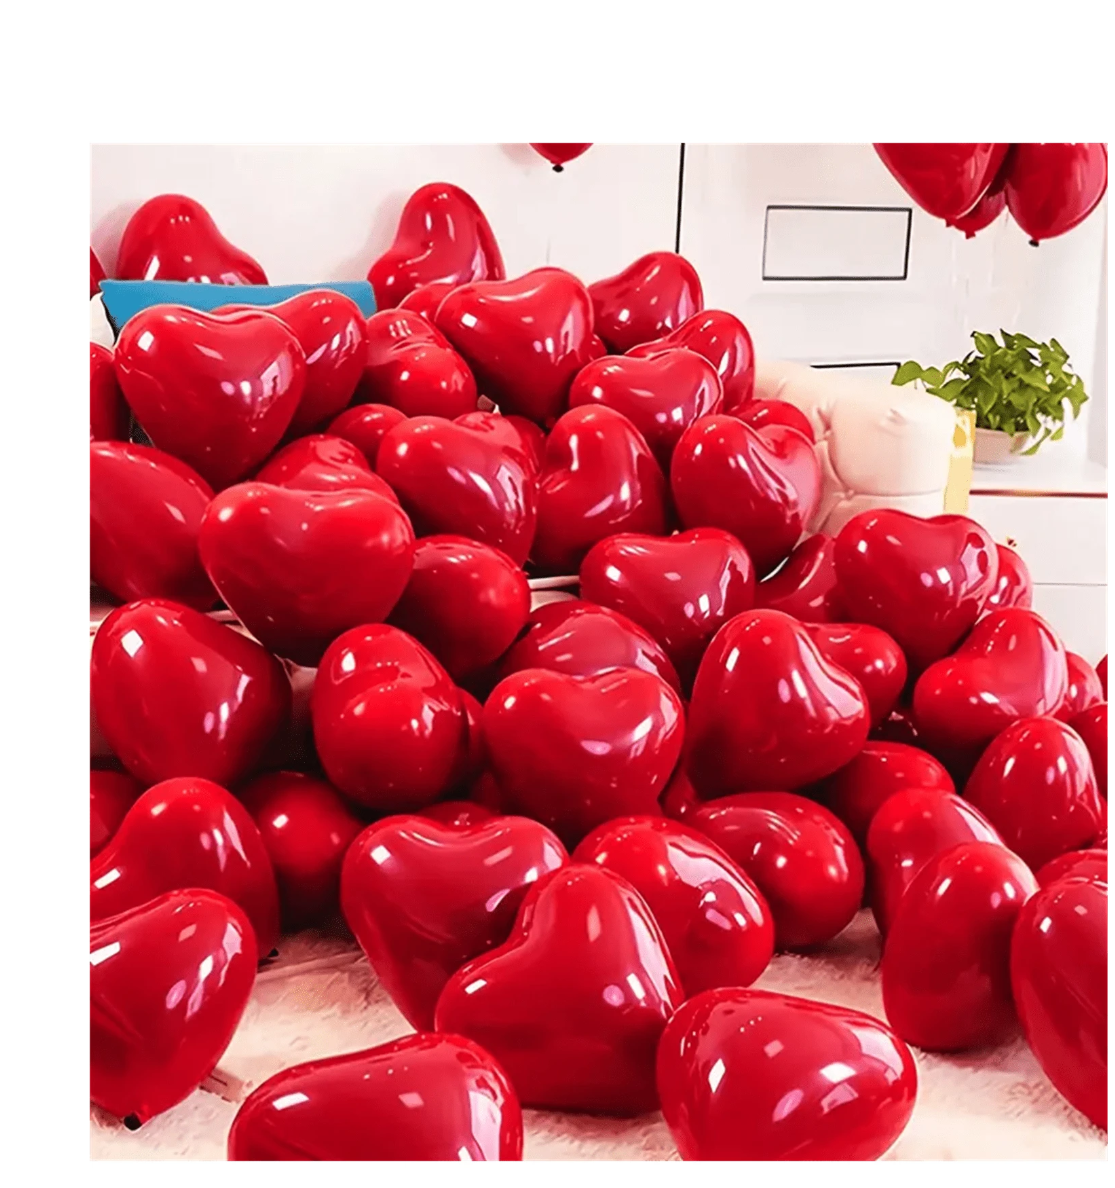 Hearts in Harmony: 20pcs Love Heart Shaped Red Latex Balloons – 10 Inches of Romance for Every Occasion!